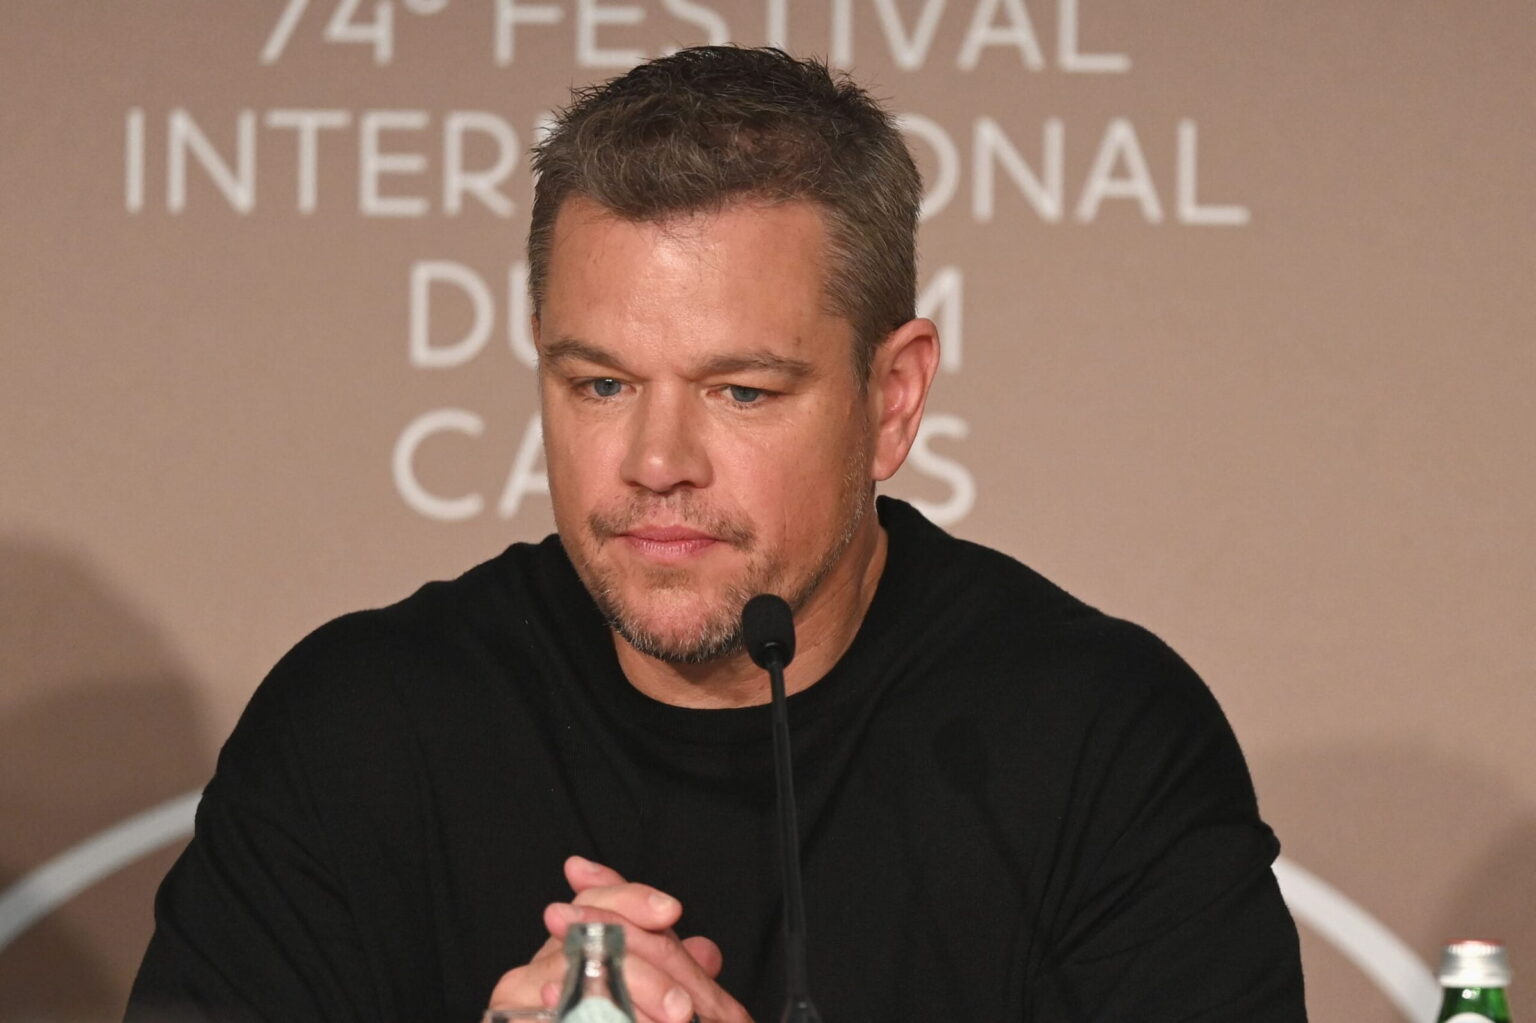 Why did Matt Damon get emotional after 'Stillwater' received a standing ovation at the Cannes Film Festival? Learn the details into those teary eyes.